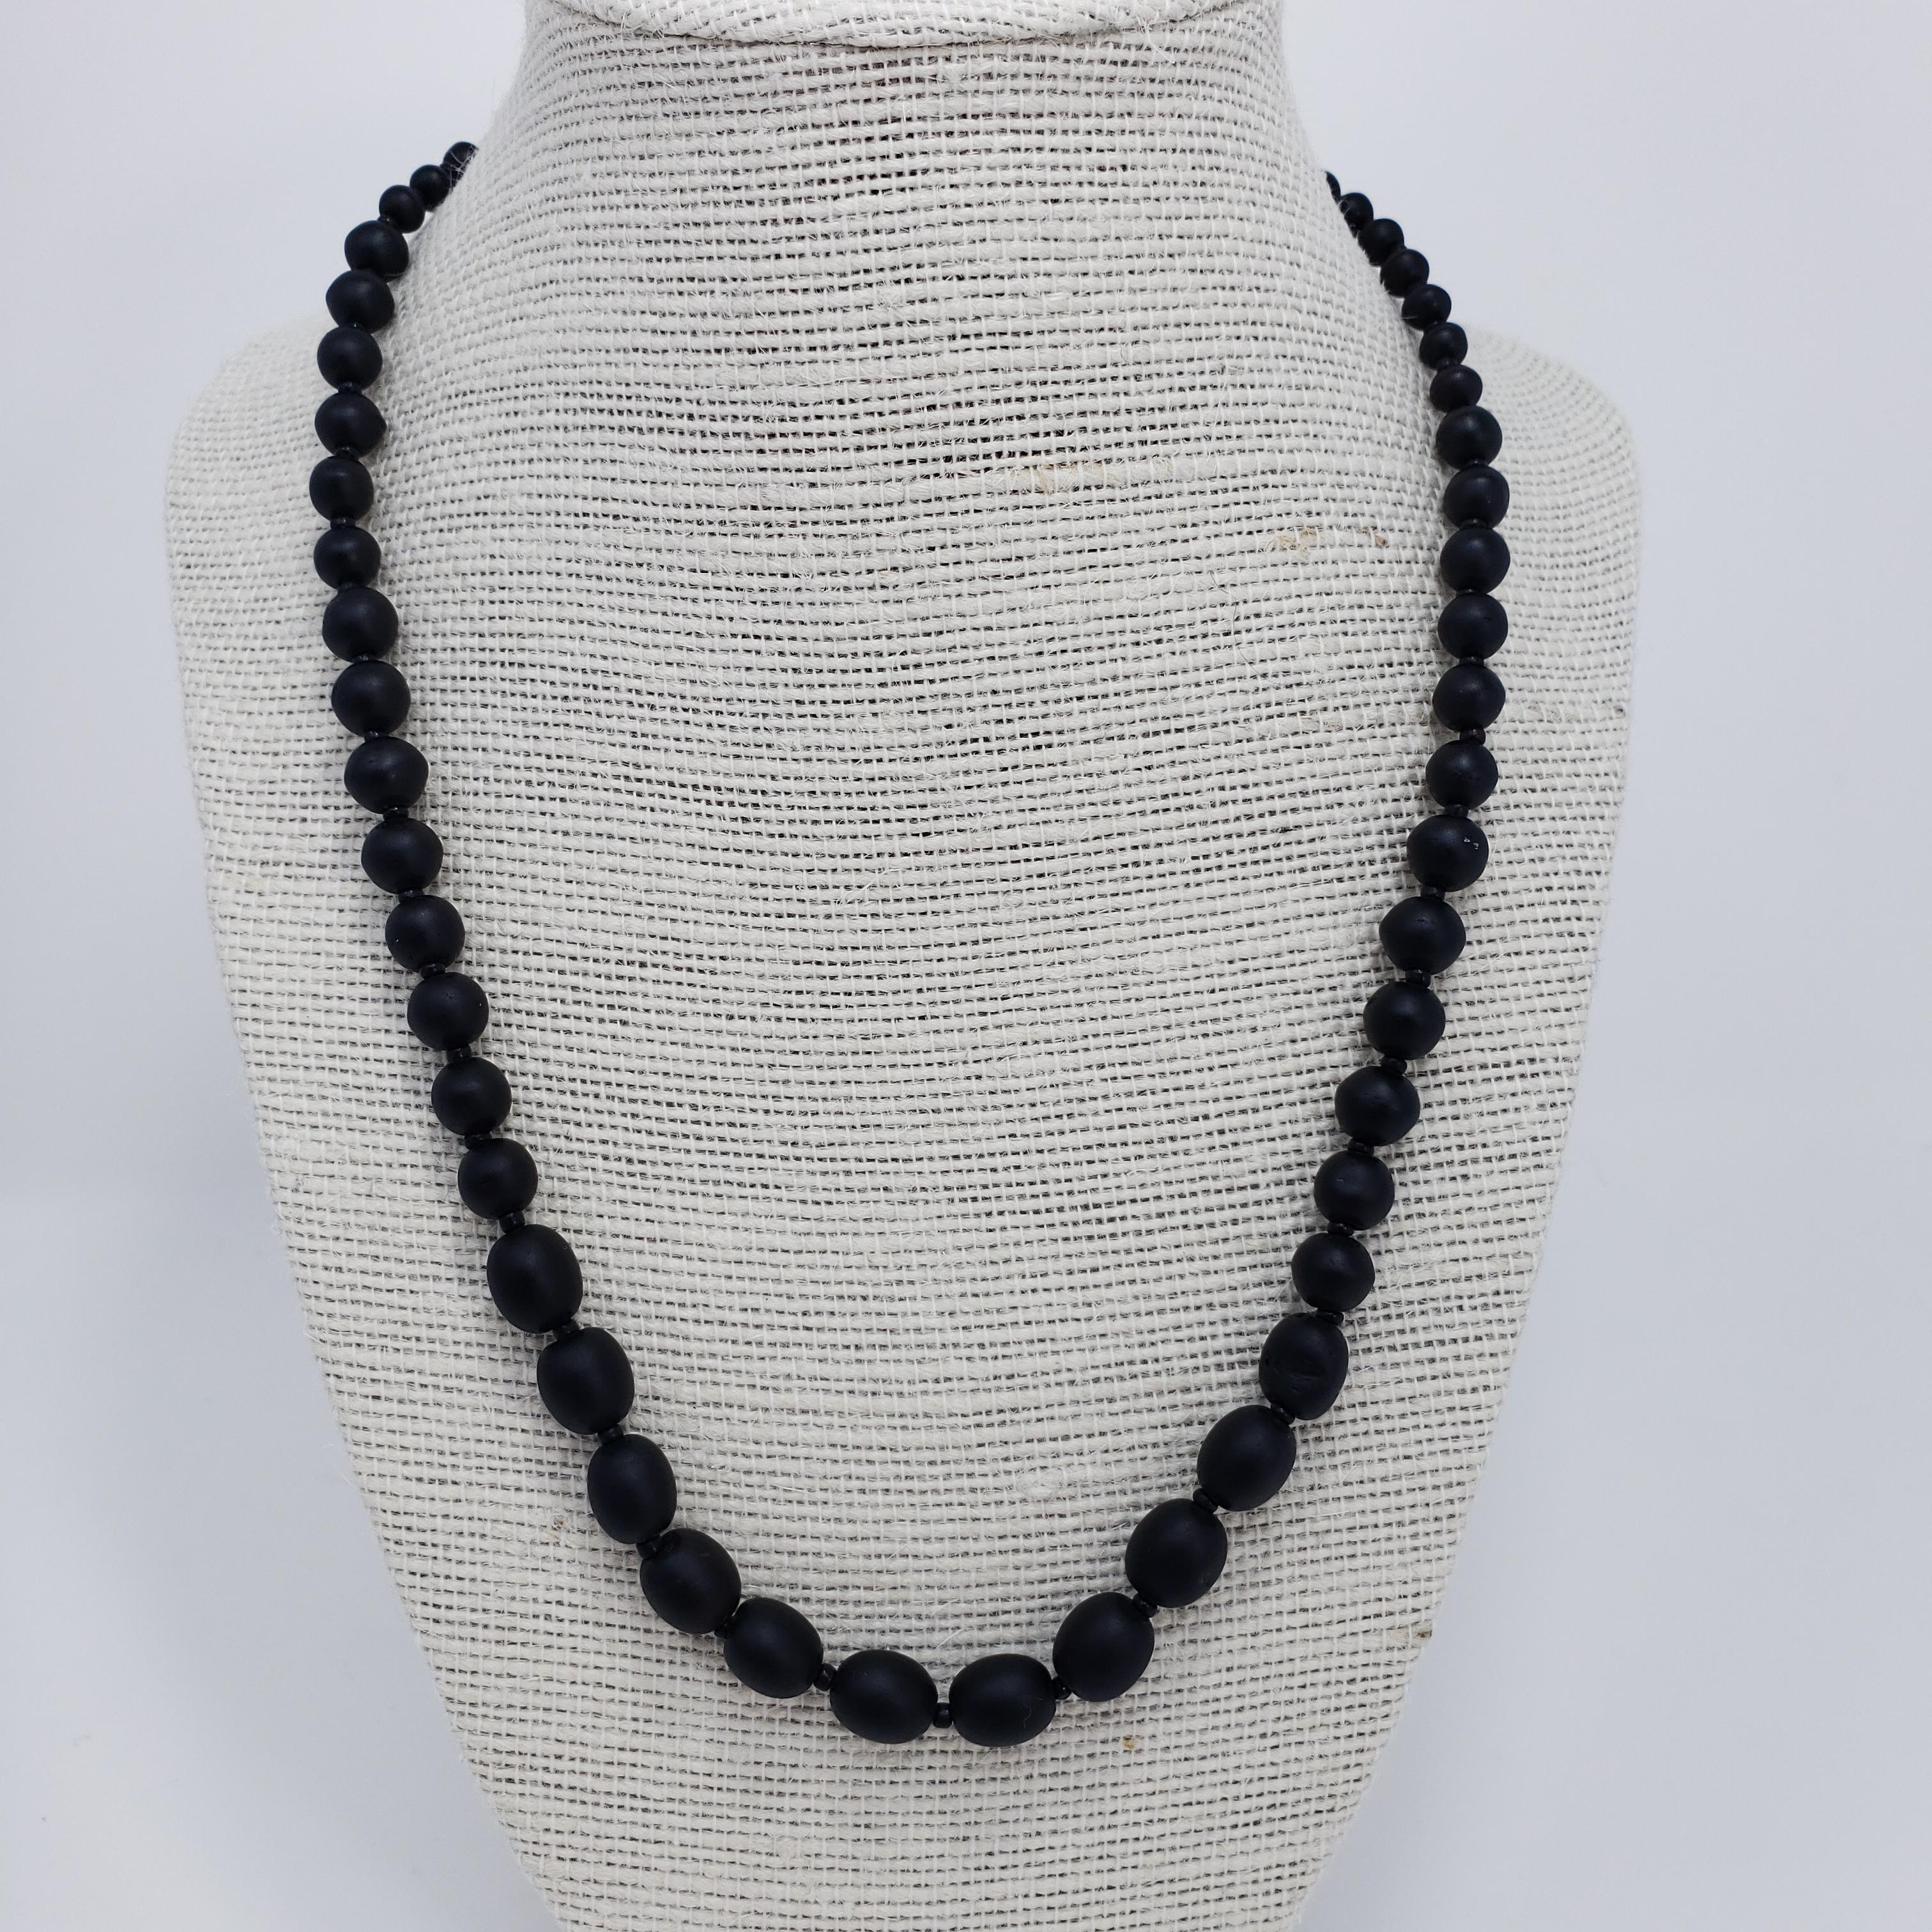 A remarkable Victorian mourning necklace. Graduated jet beads, varying in size from 4x3mm to 10x8mm, hang on a black string, separated with small jet circlets. 51 cm in length, with spring ring clasp closure.

Has light wear and minor repairs